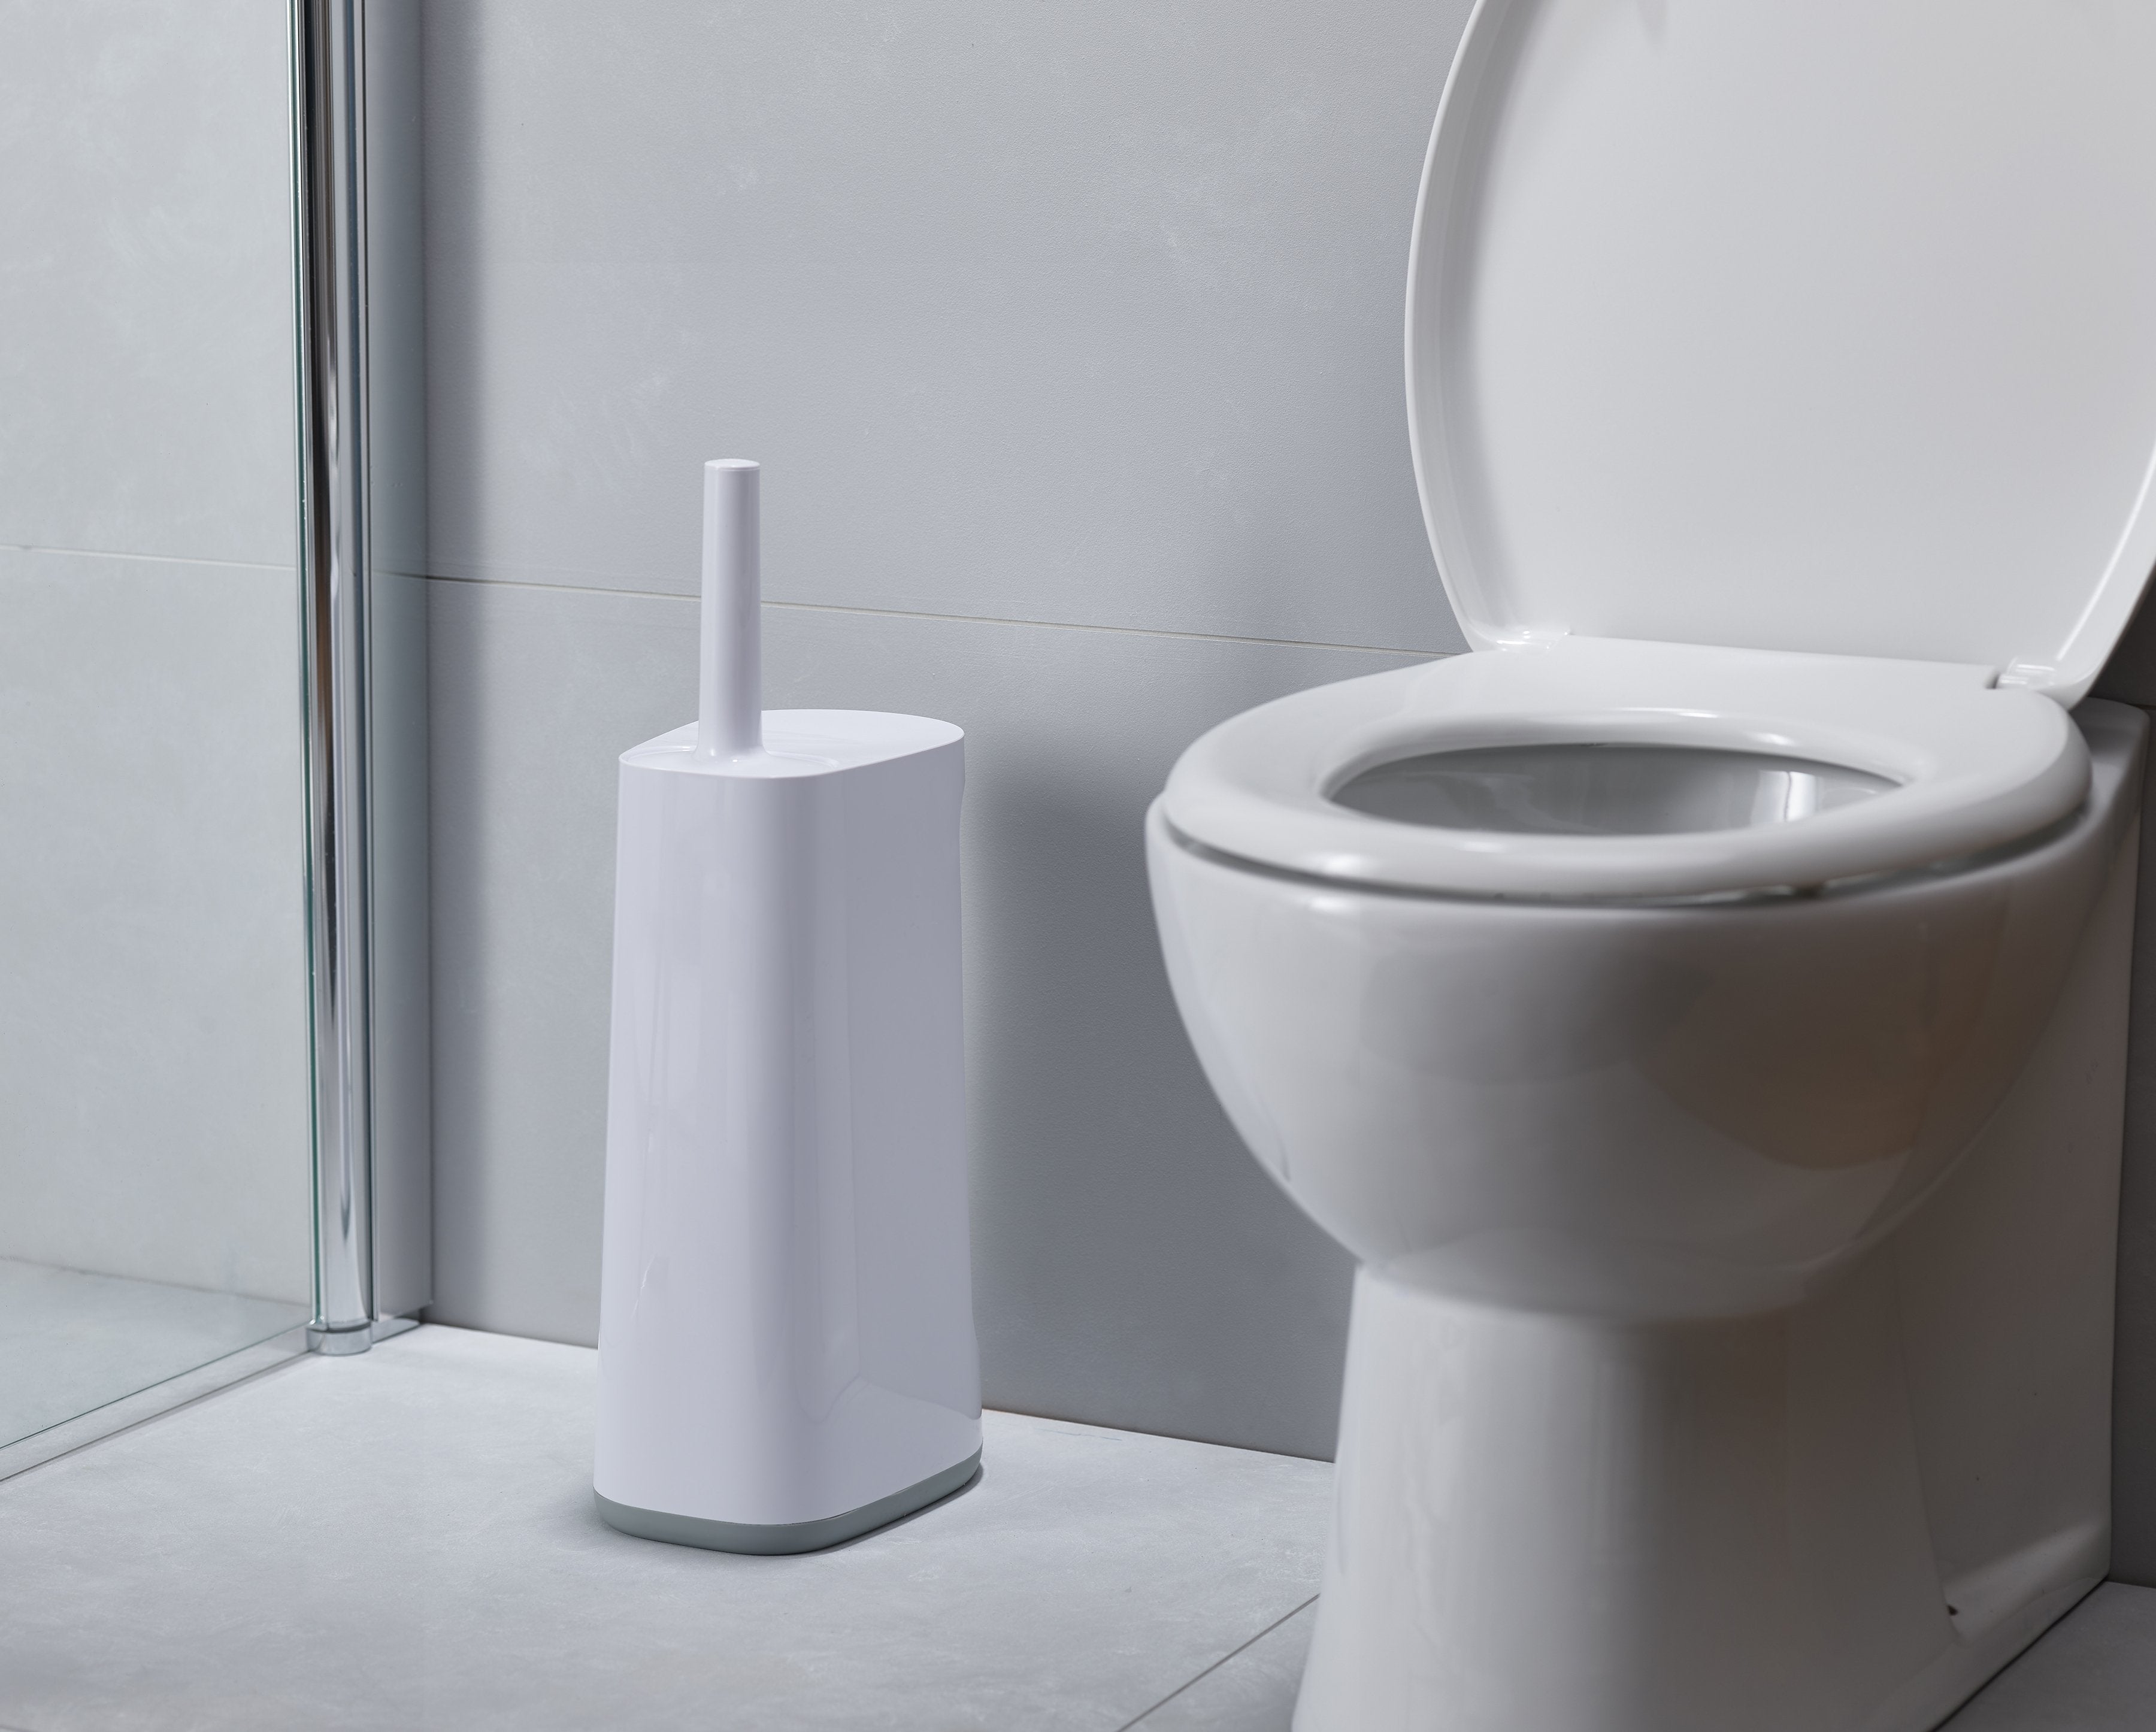 BEON.COM.AU  This innovative storage solution comprises a revolutionary Flex™ toilet brush in a holder that features an extra-large caddy, which can hold up to three spare toilet rolls or a large cleaning bottle.  Flexible, D-shaped head reaches all areas, even under the rim Anti-drip: less dripping between ... Joseph Joseph at BEON.COM.AU